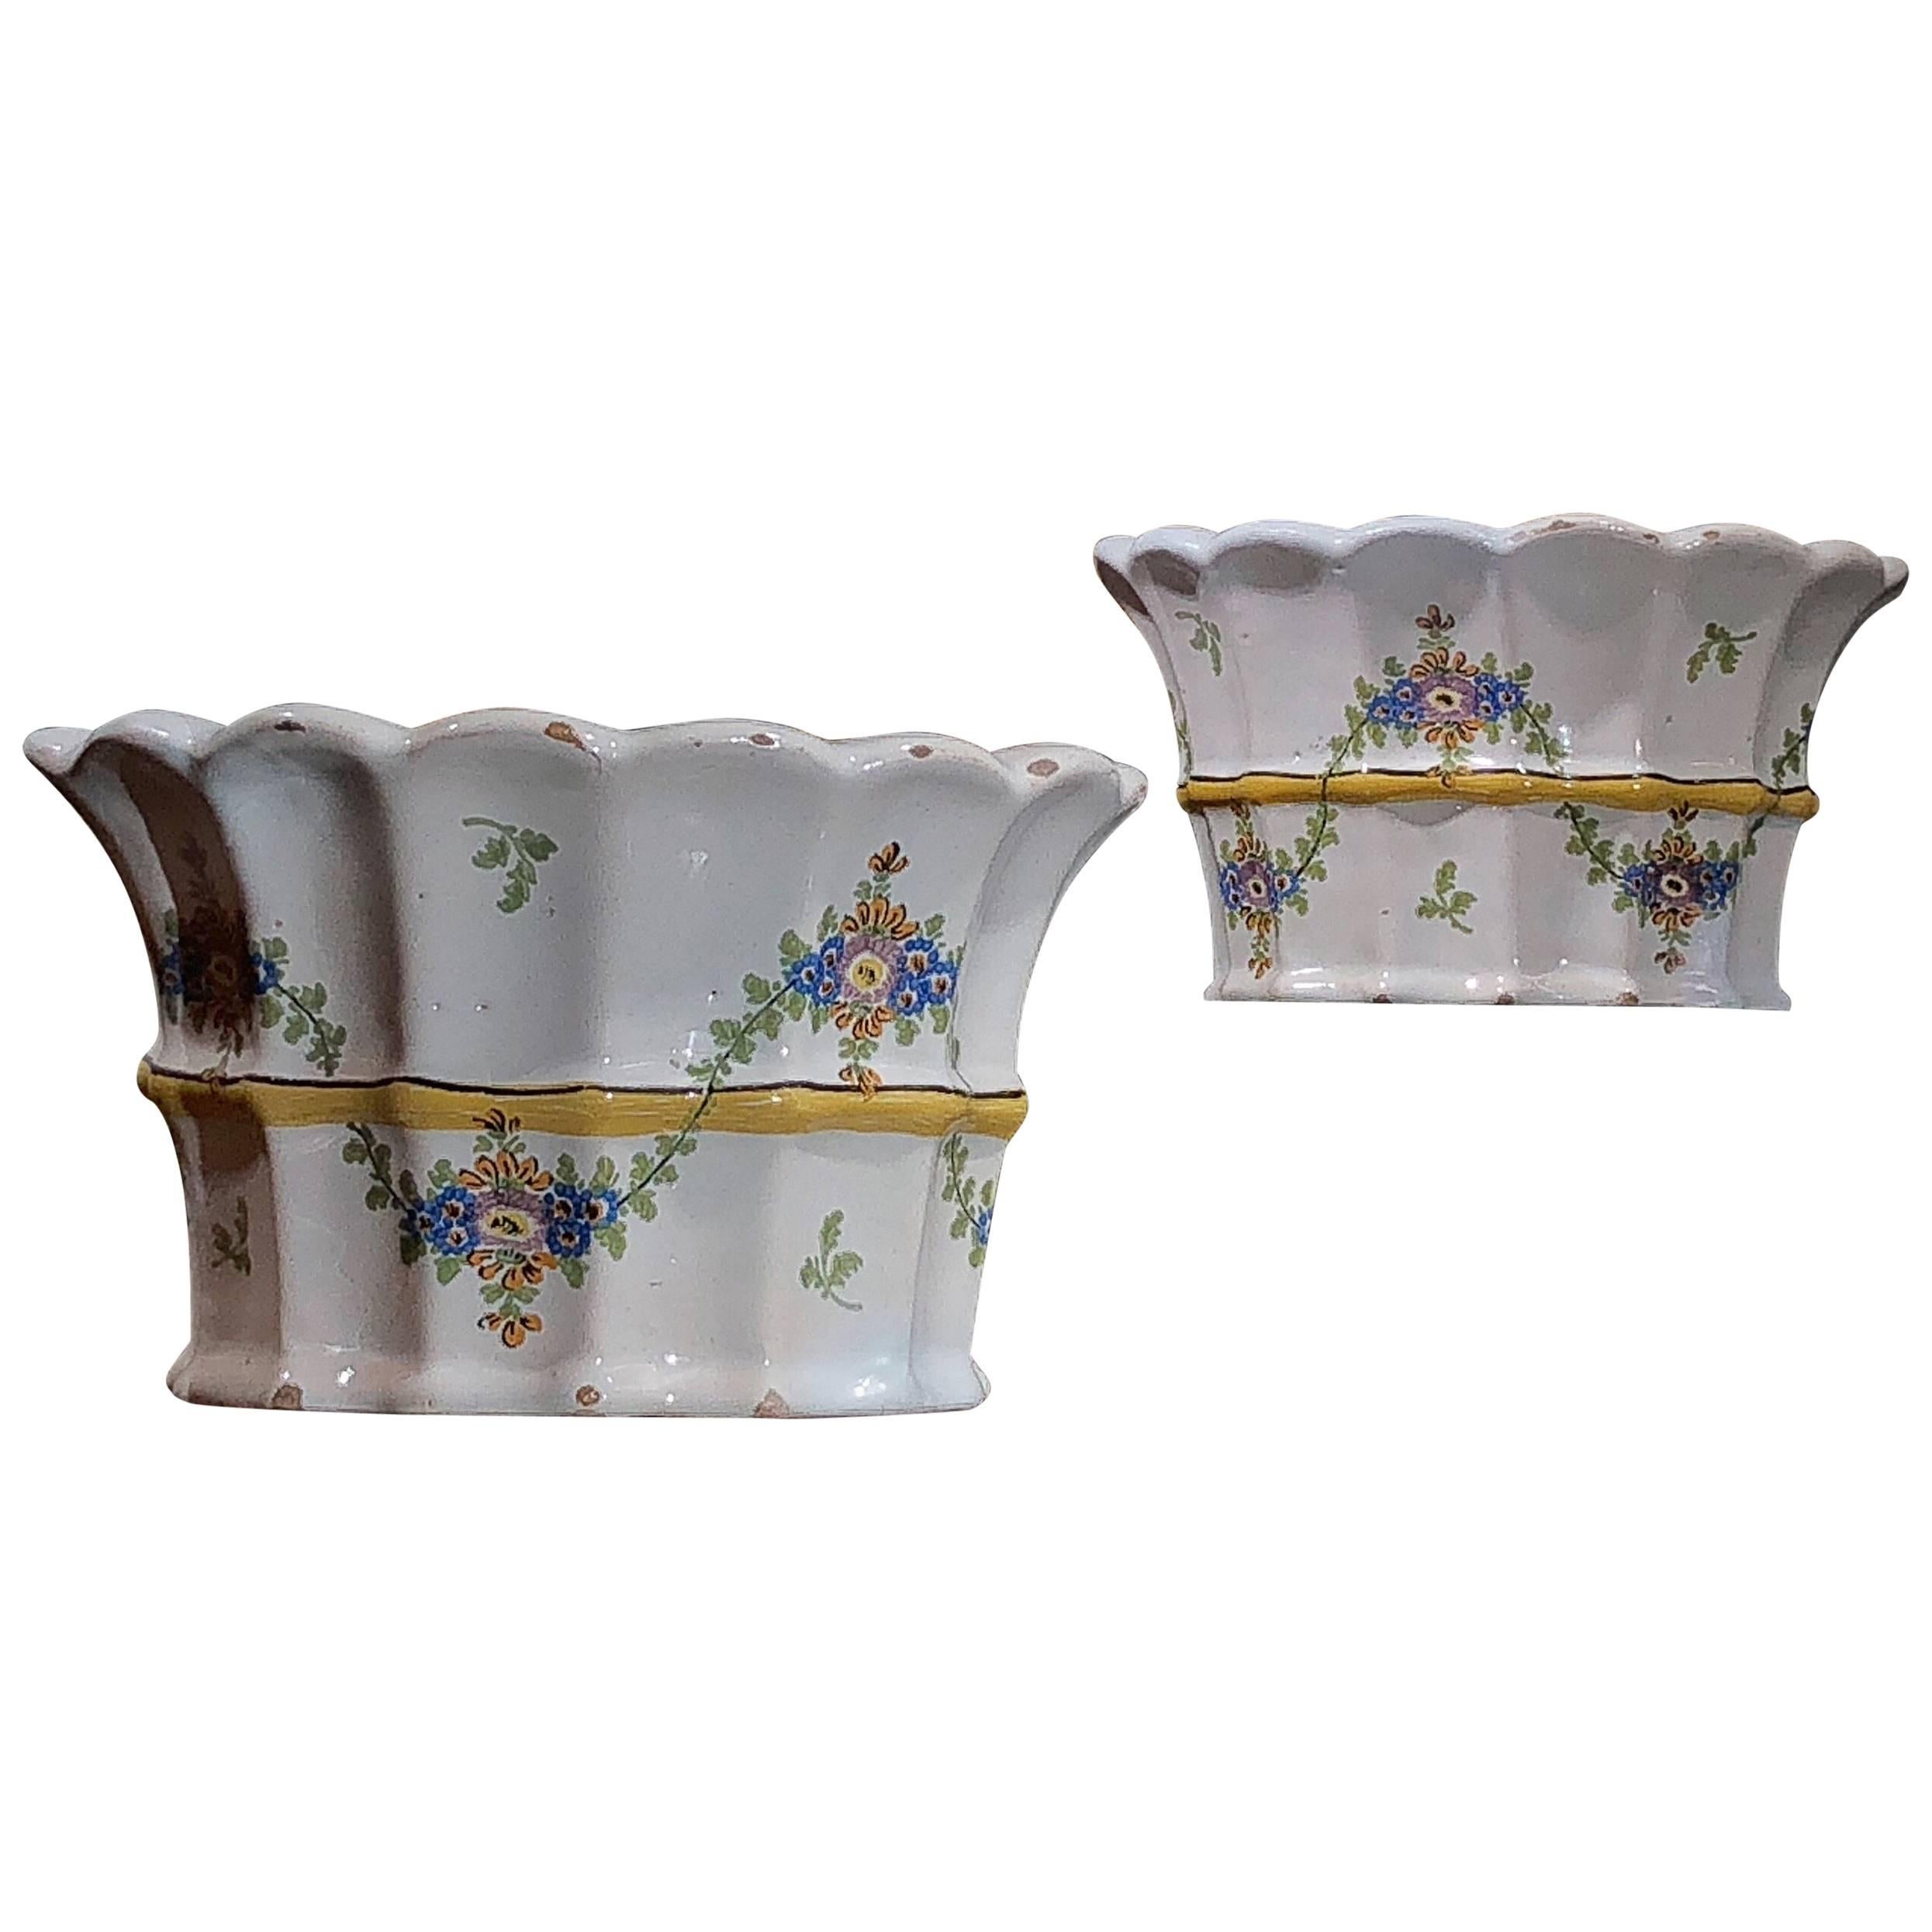 Pair of Hannoversch-Münden, Lower Saxony, Rococo Faience Bough Pots, circa 1780